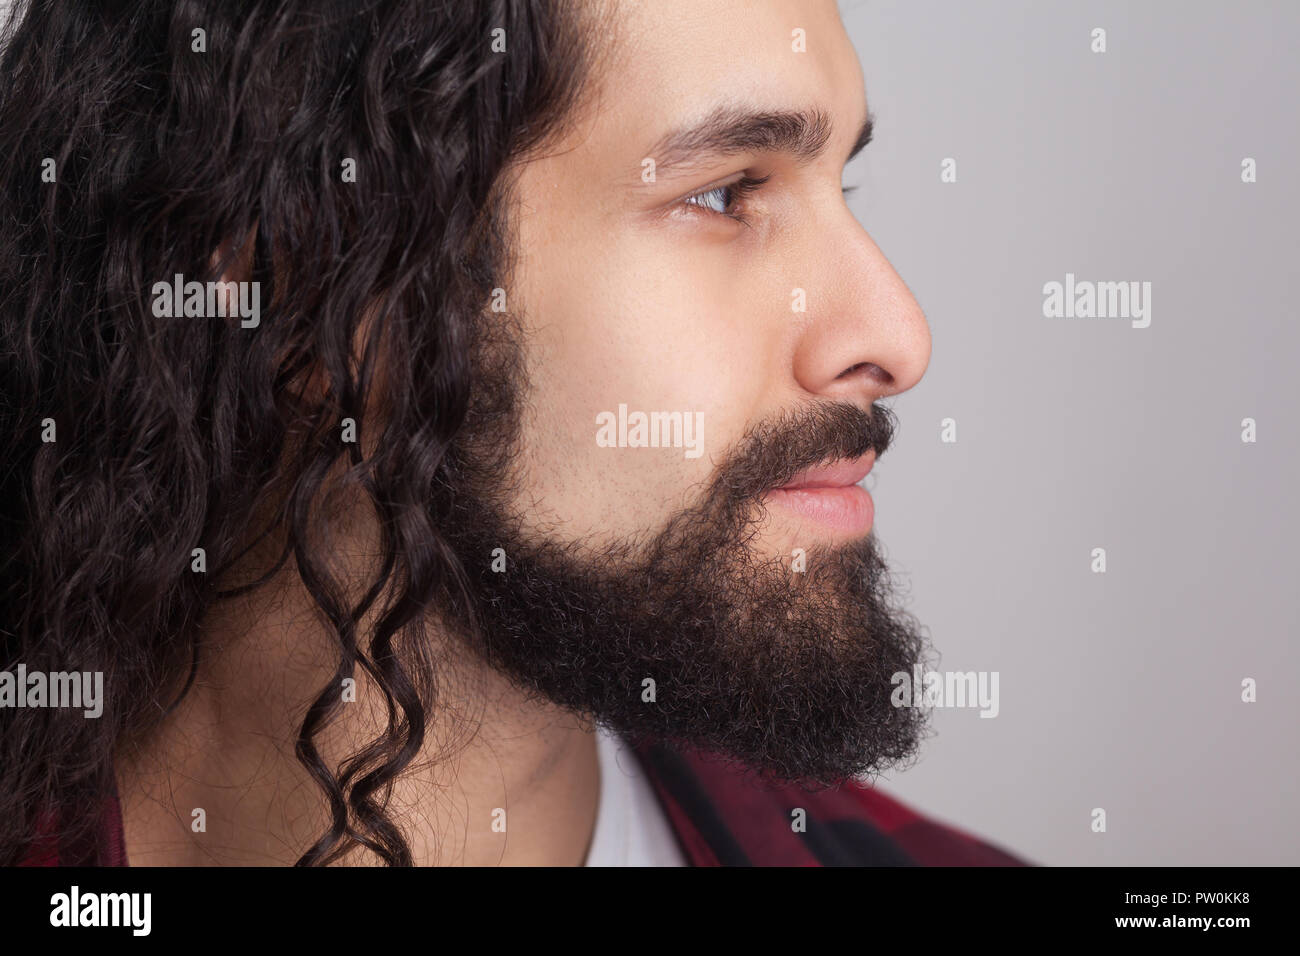 Closeup profile side view of handsome confident man with black long curly hair and beard, looking away with smile. male healthcare and beauty concept. Stock Photo